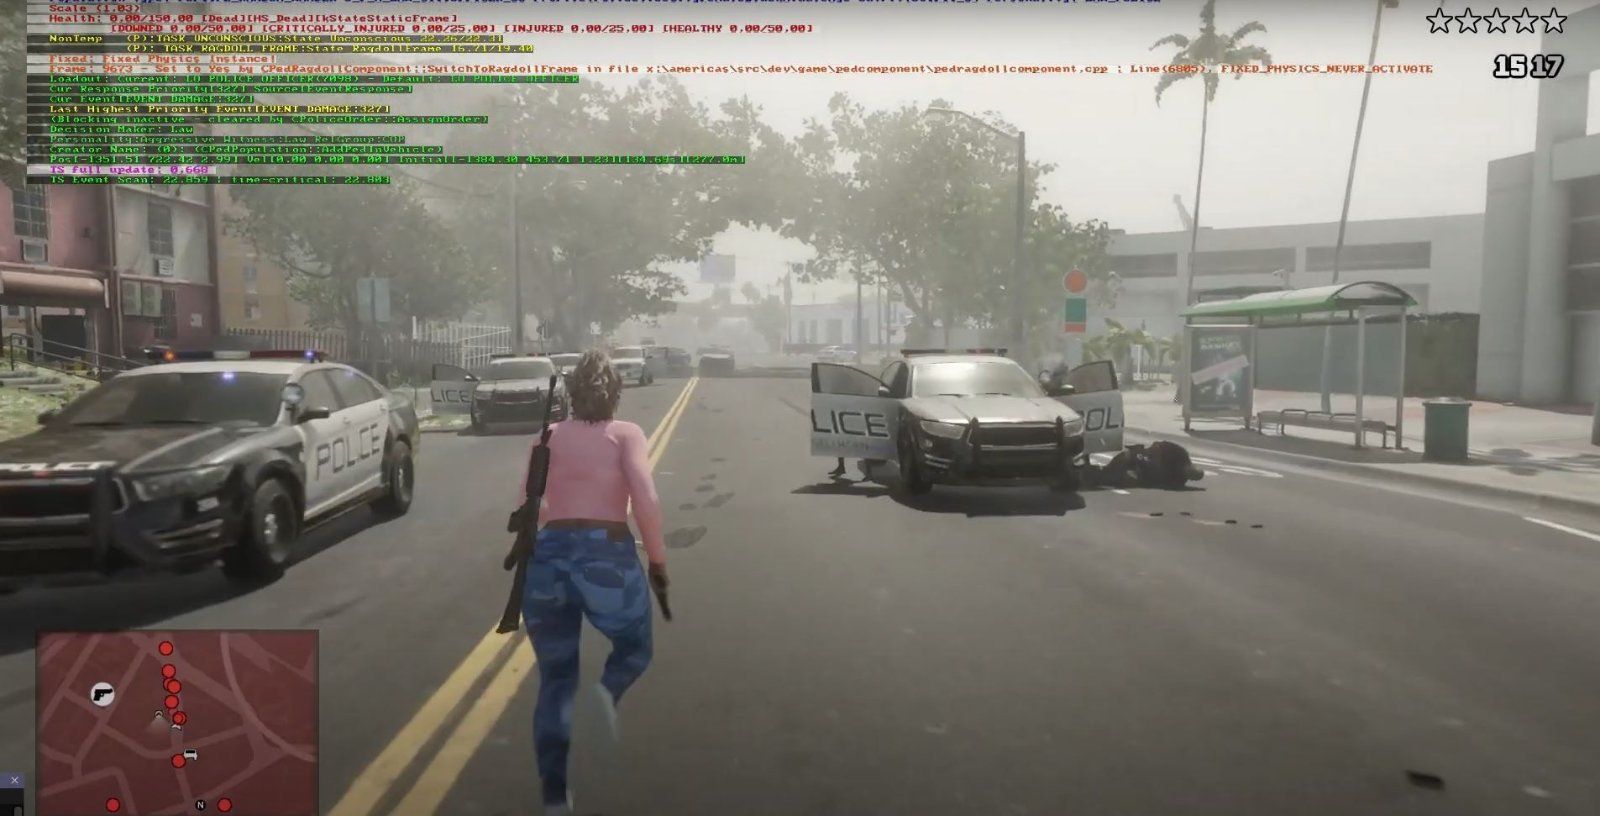 historic-gta-6-leak-shows-the-game-is-set-in-vice-city-gameplay-looks-awesome_7.jpeg.7bc5cb866d3b8cf08b8007630562ef2c.jpeg